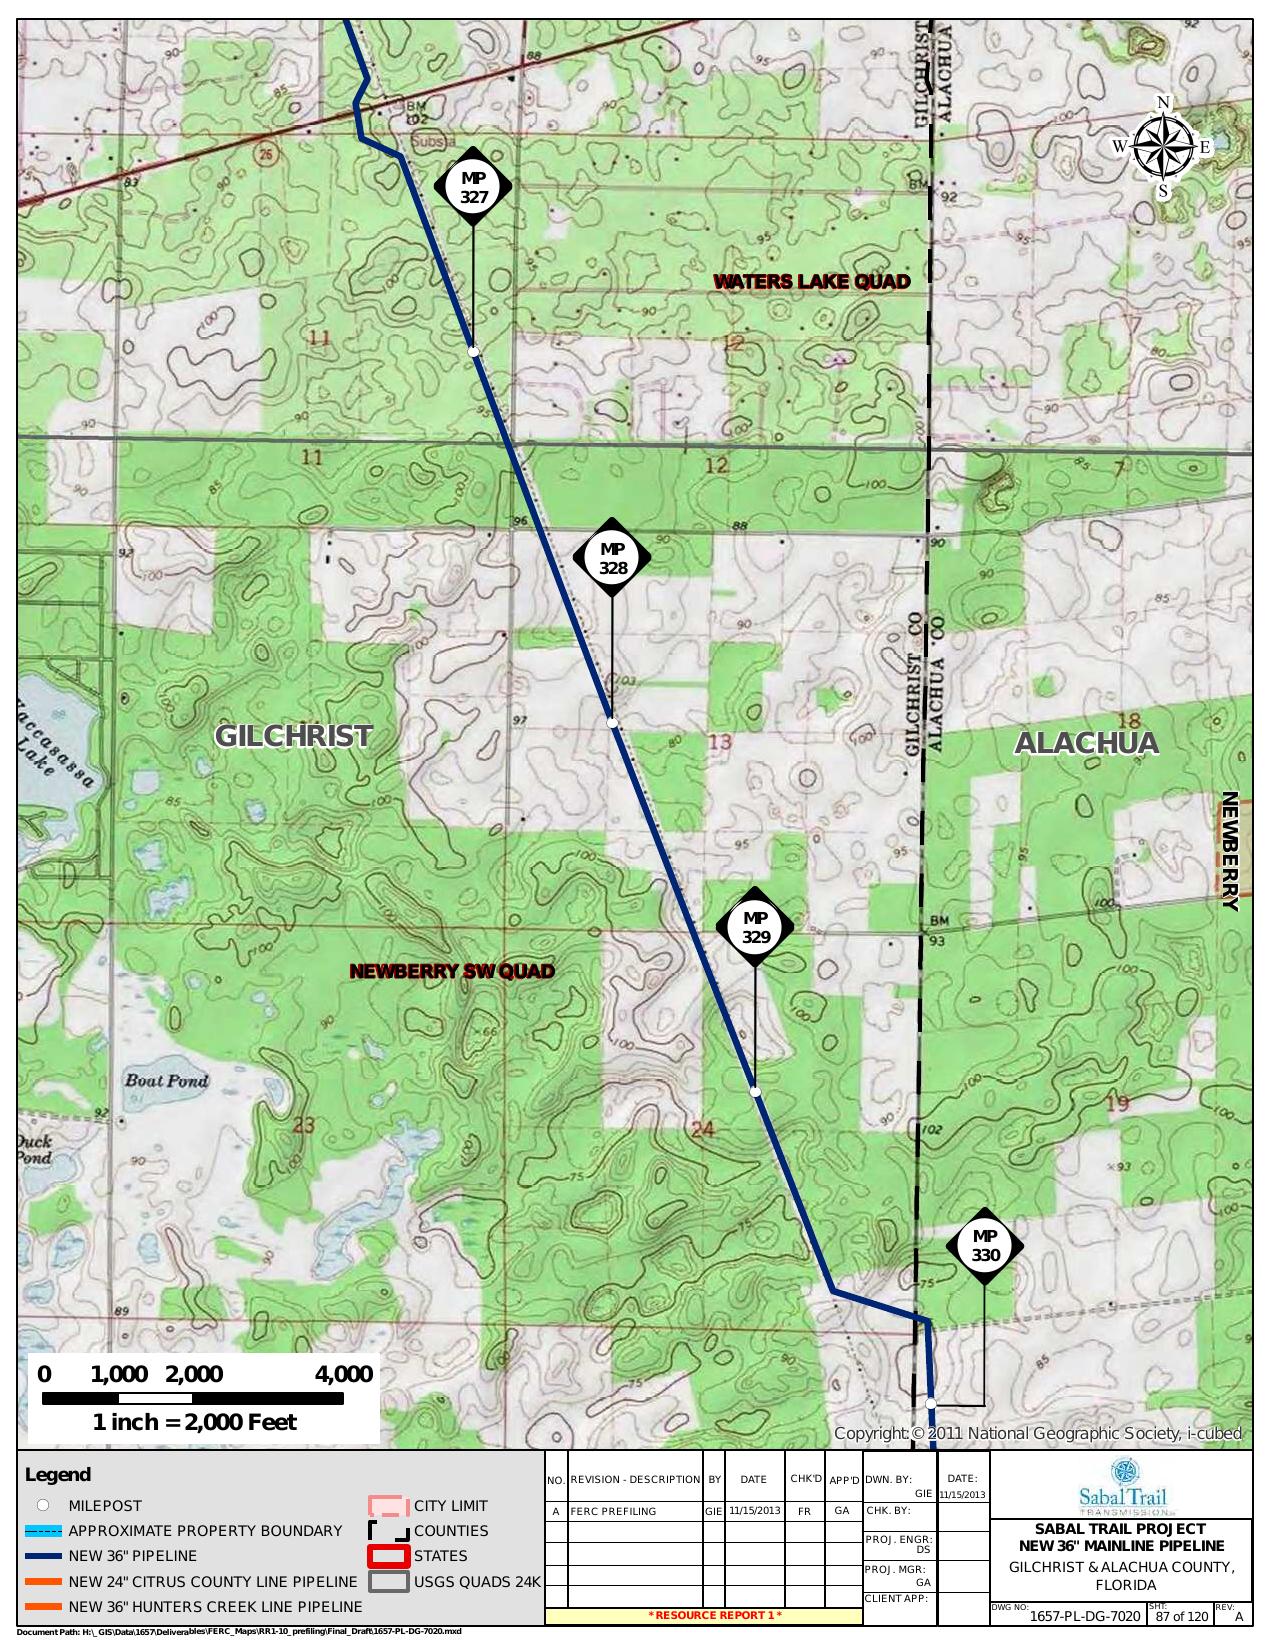 *Newberry SW Quad, Gilchrist and Alachua County, Florida, in General Project Description, by SpectraBusters, for FERC Docket No. PF14-1-000, 15 November 2013, converted by SpectraBusters